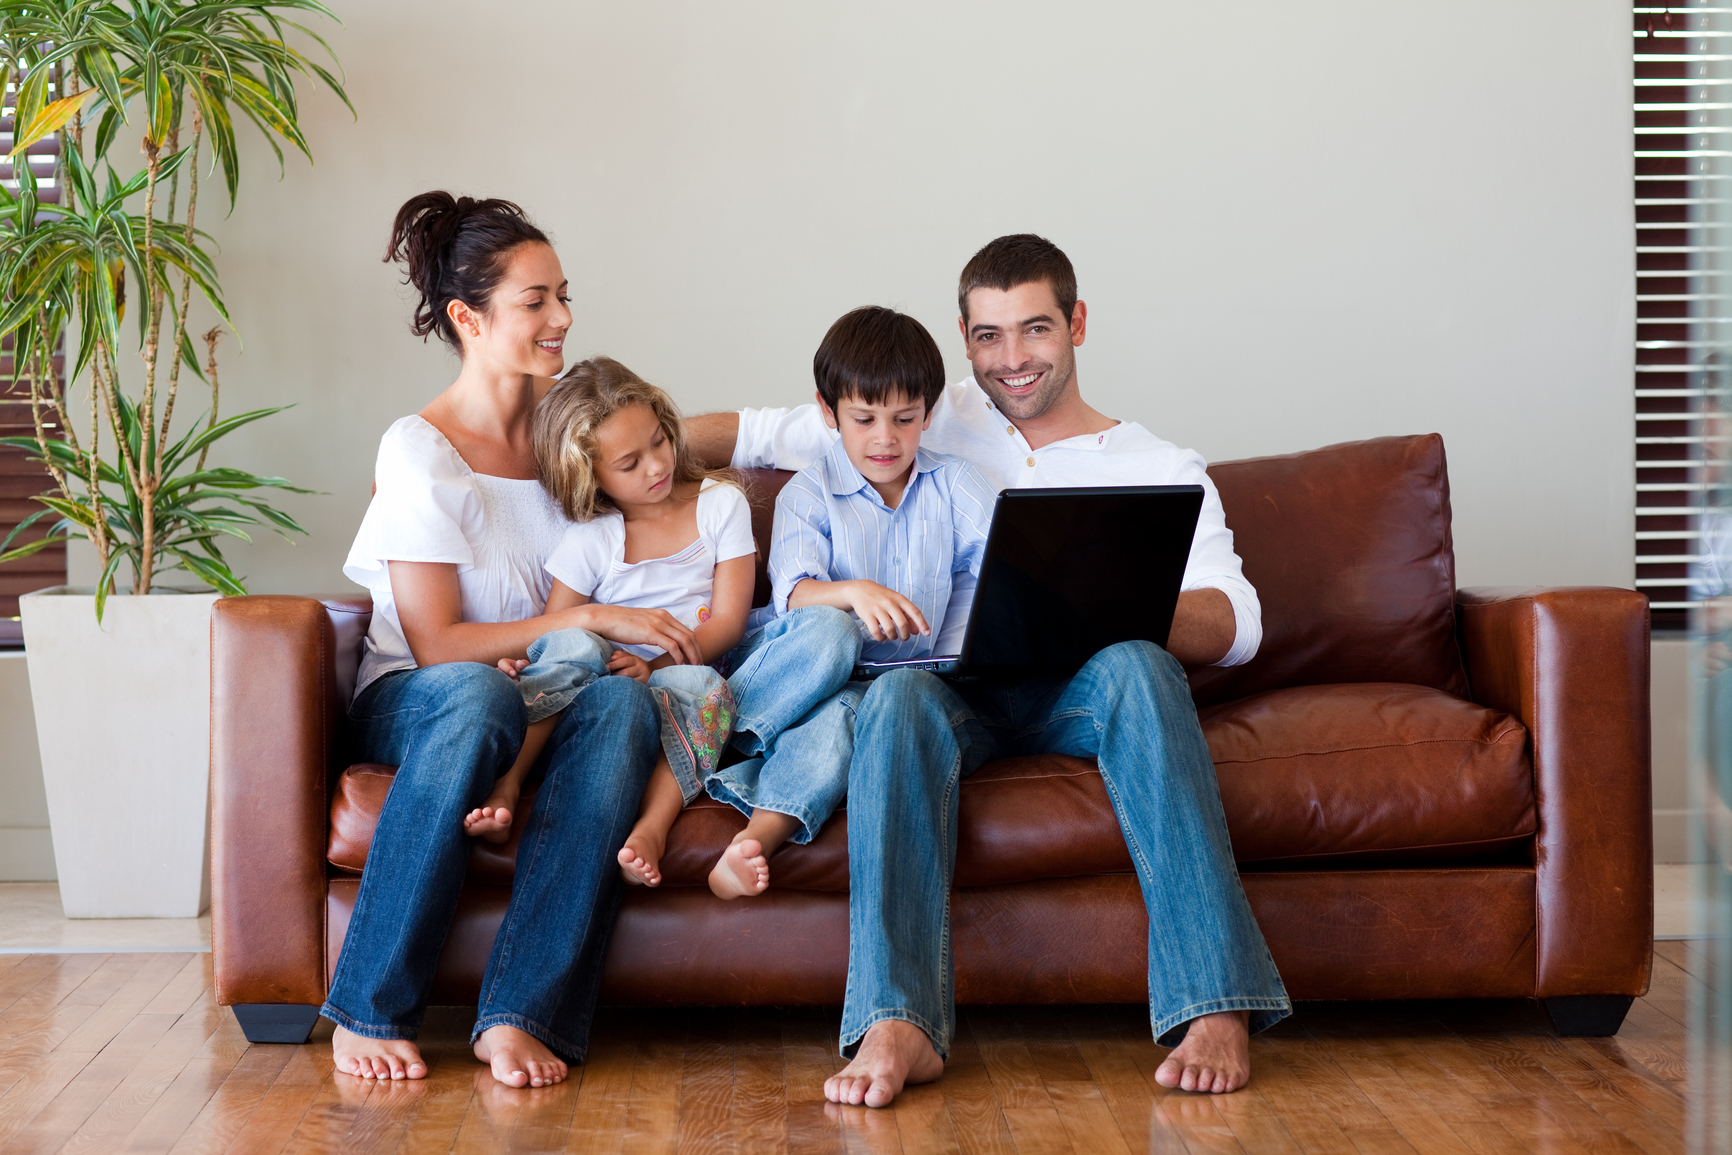 Family playing together with a laptop on a couch